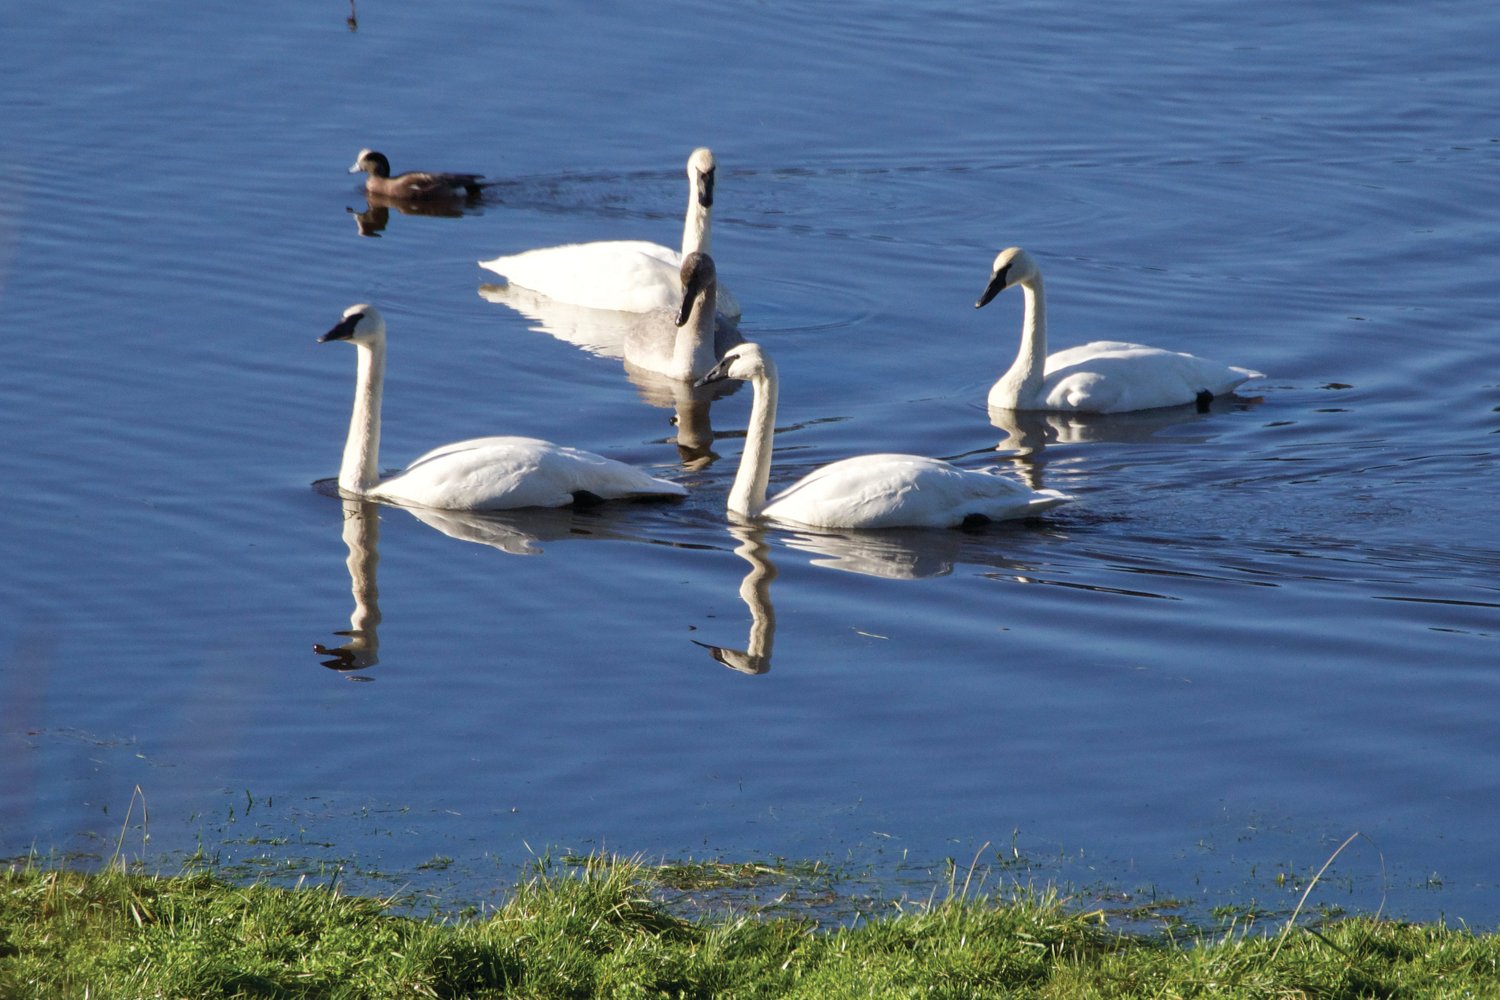 Trumpeter swans swim in a winter pond on Short’s Family Farm, Chimacum Valley.